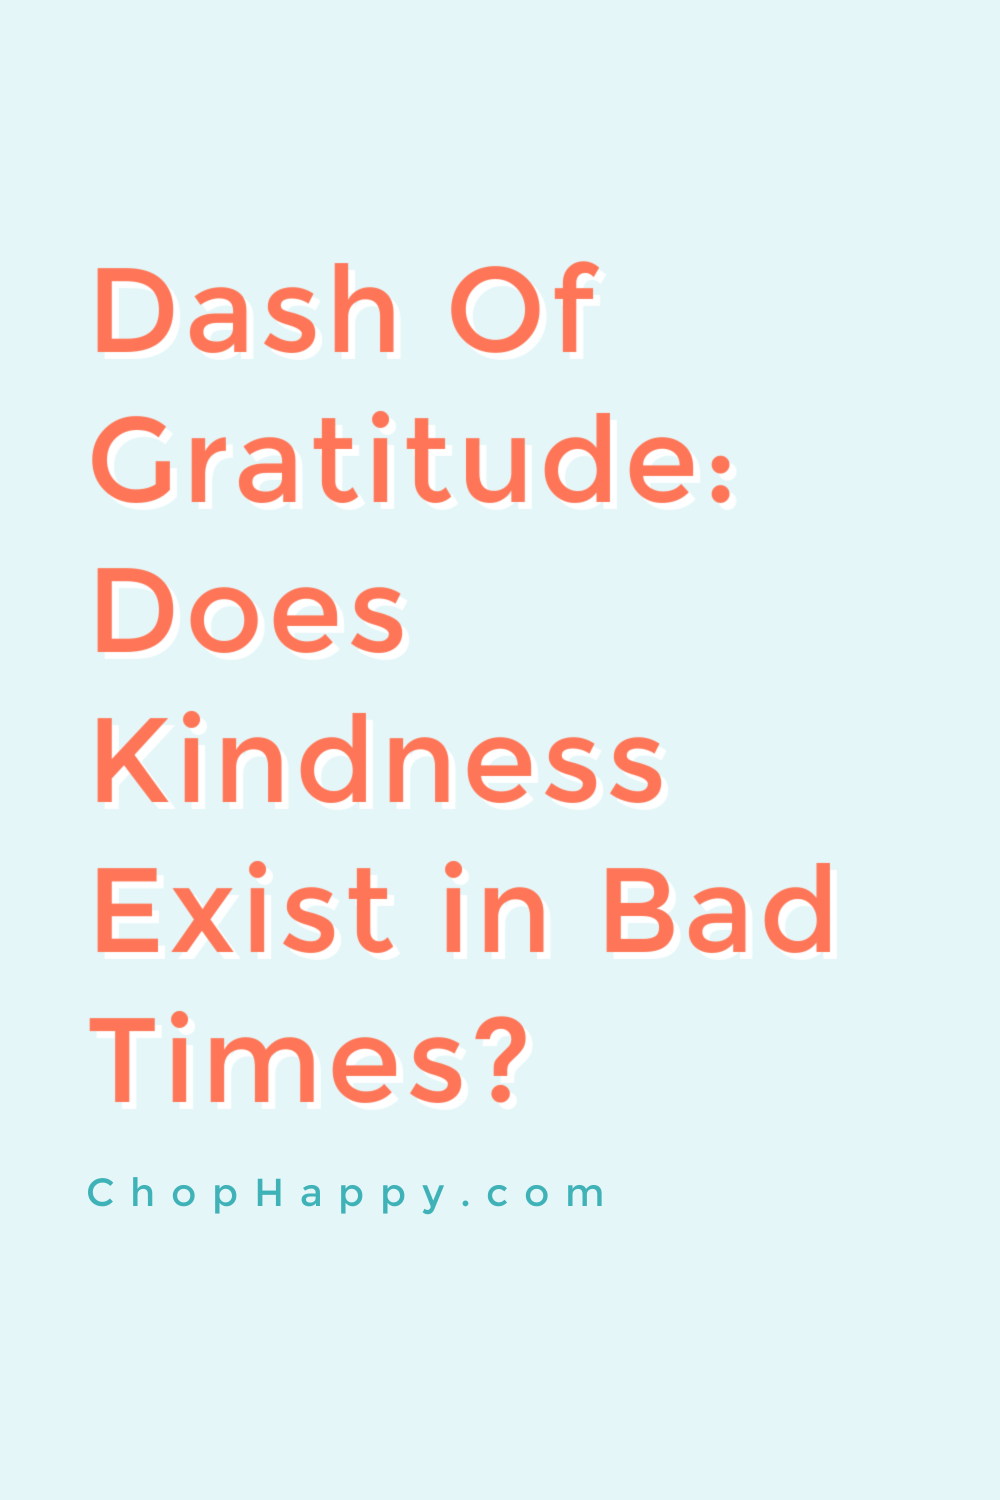 Dash of Gratitude: Does Kindness Exist in Bad Times? Even when things go wrong there is love hope and kindness. Happy Monday! #kindness #gratitude